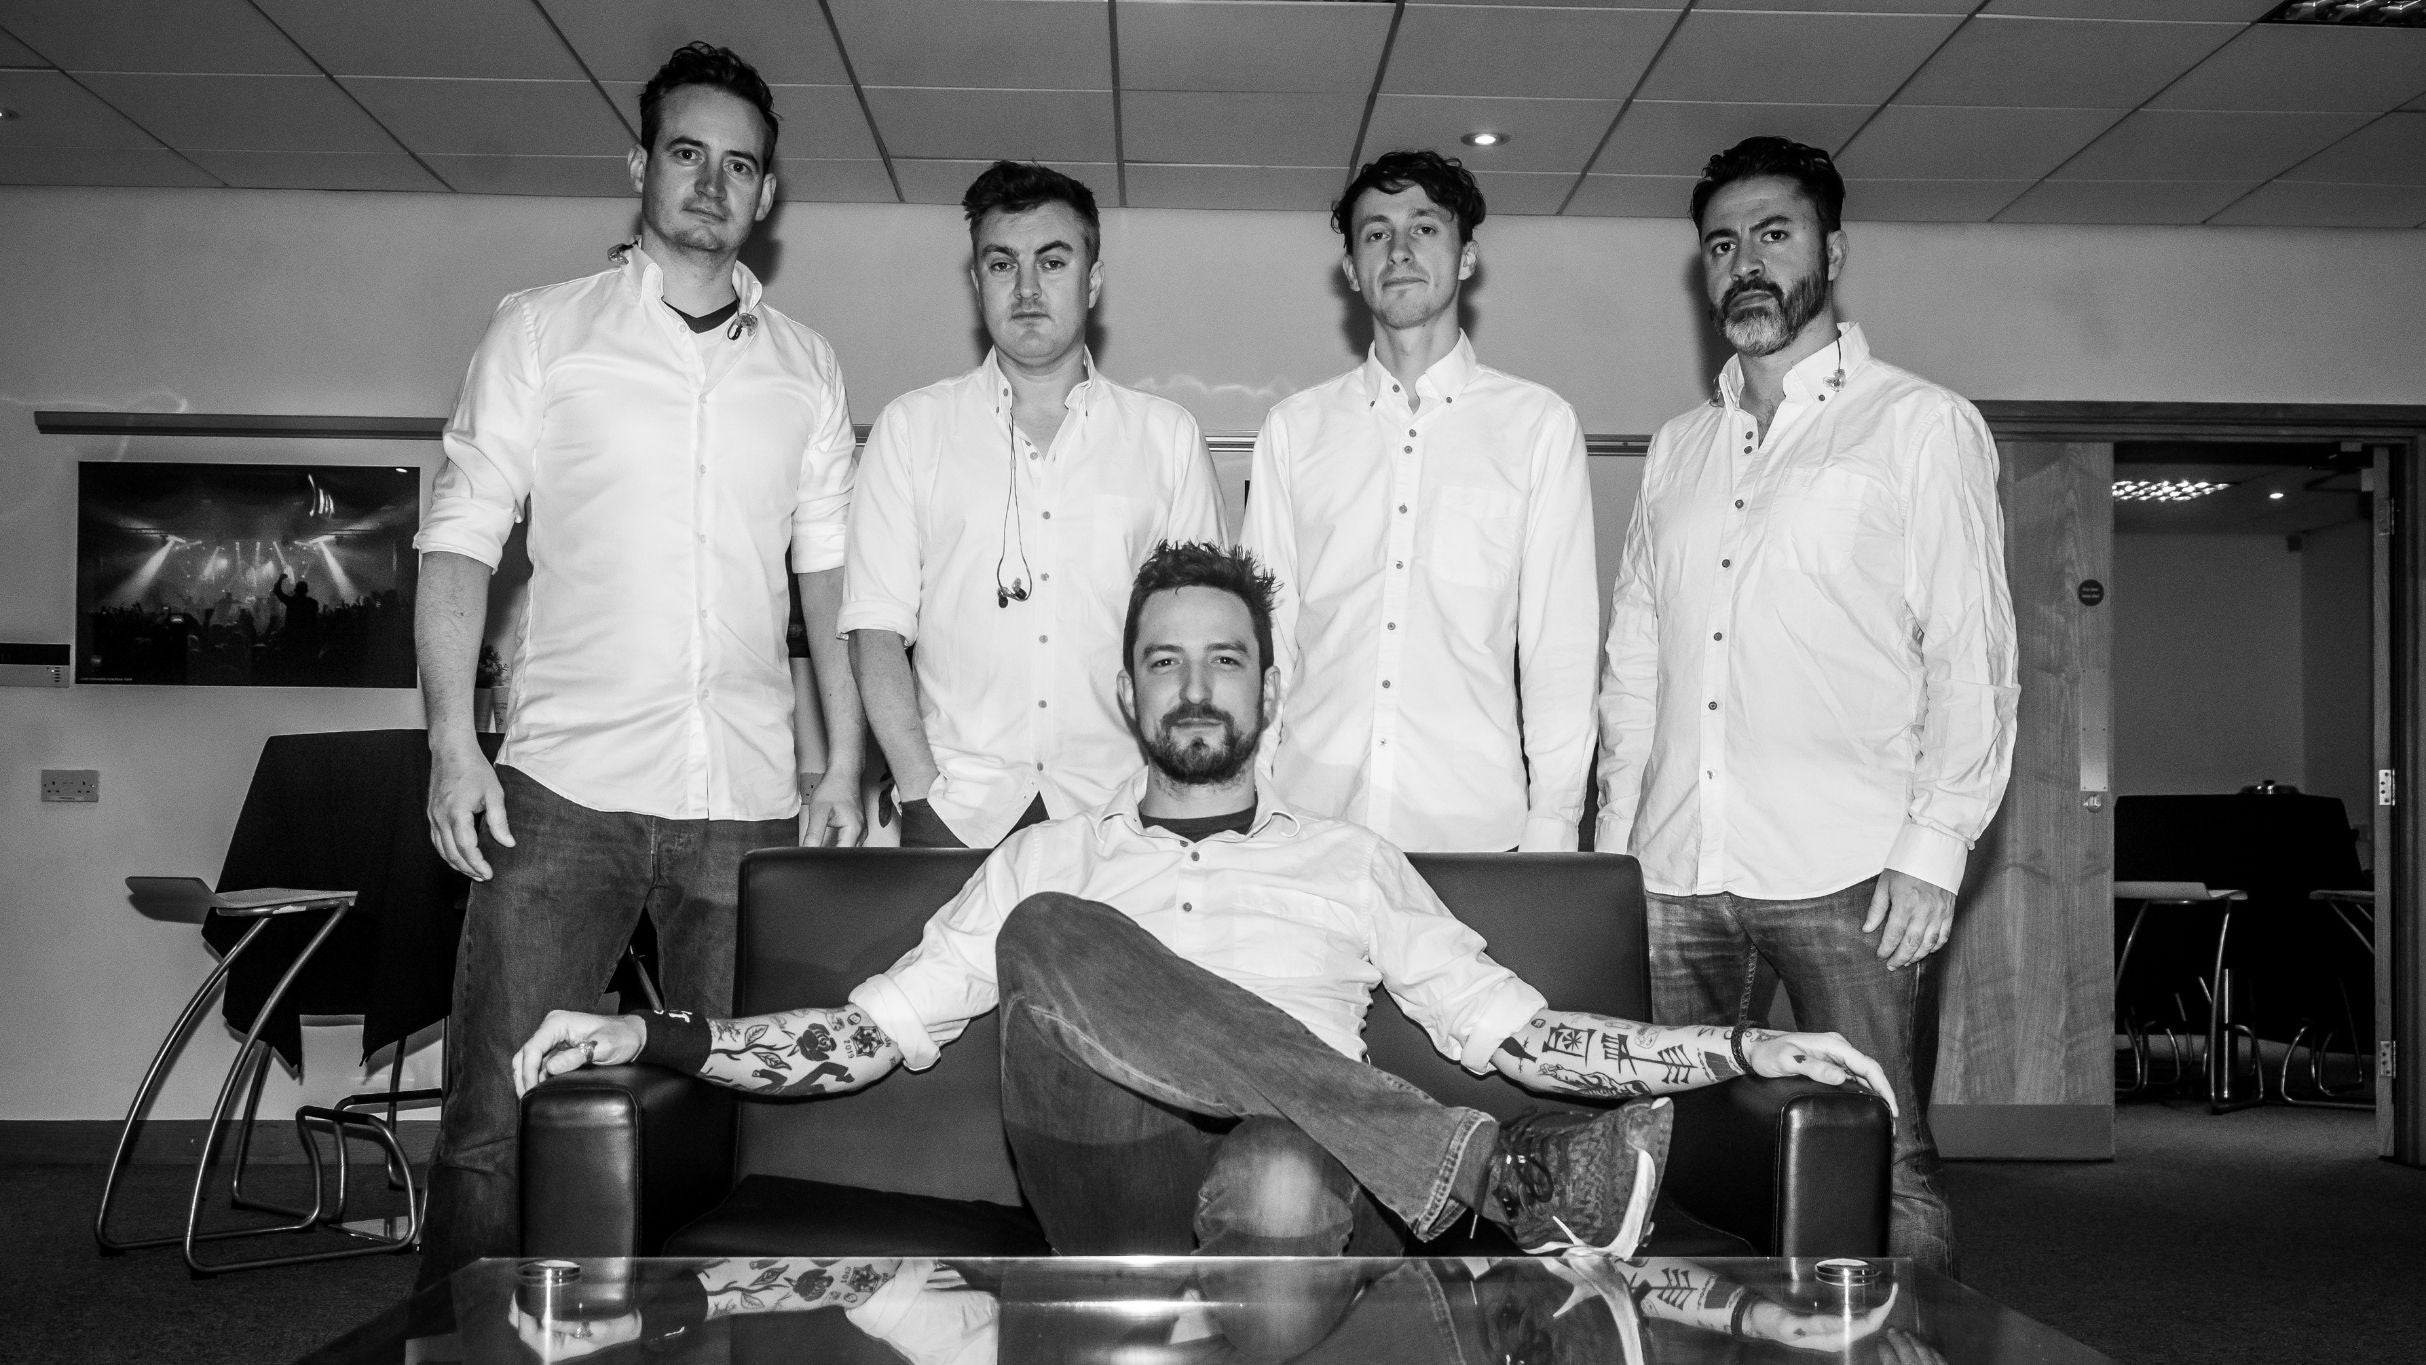 members only presale password for Frank Turner & the Sleeping Souls presale tickets in Oxford at O2 Academy2 Oxford